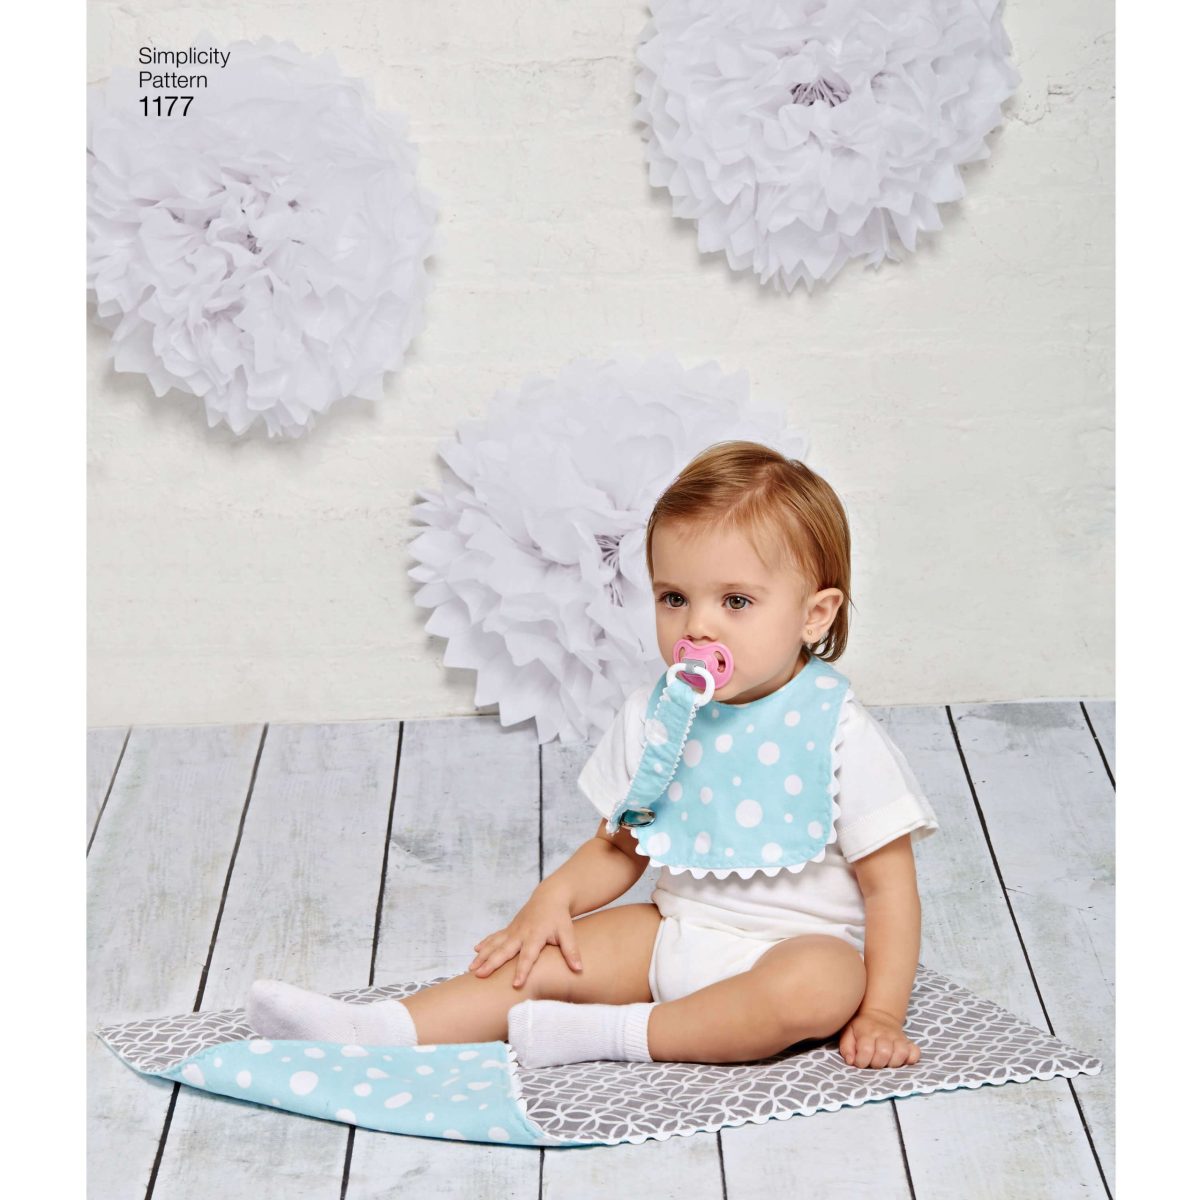 Simplicity Sewing Pattern 1177 Accessories for Babies